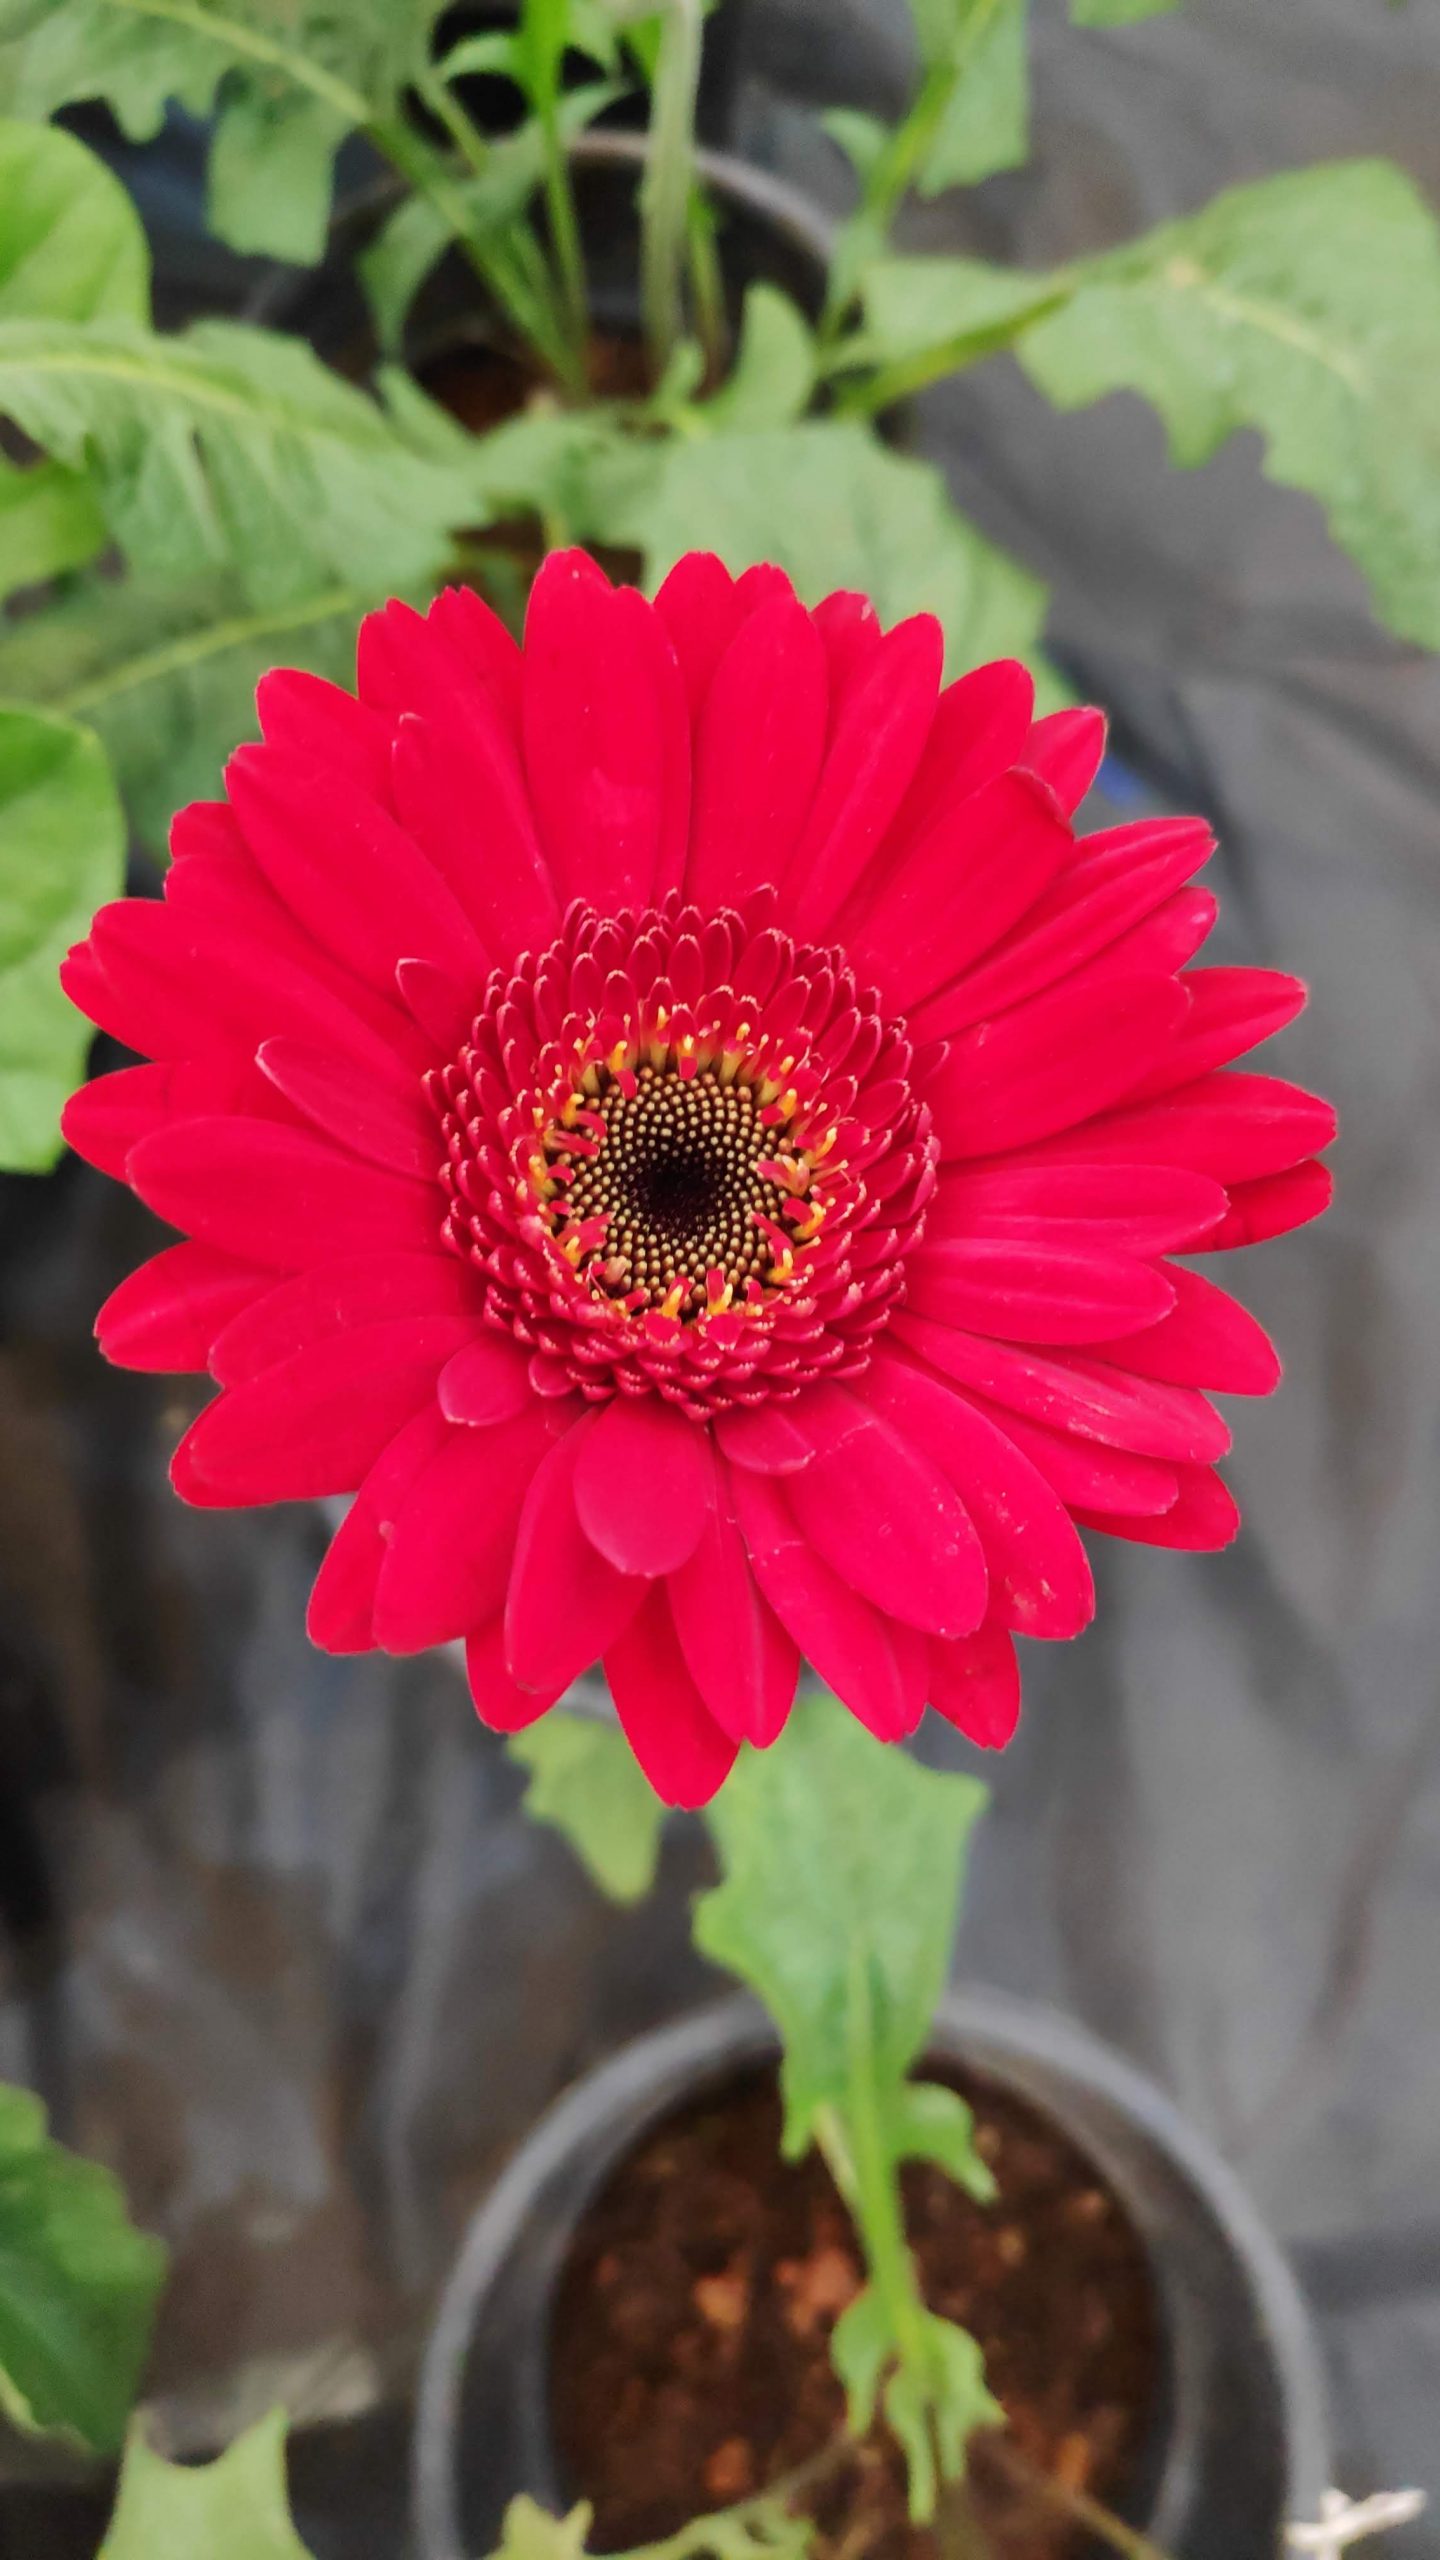 A red daisy flower